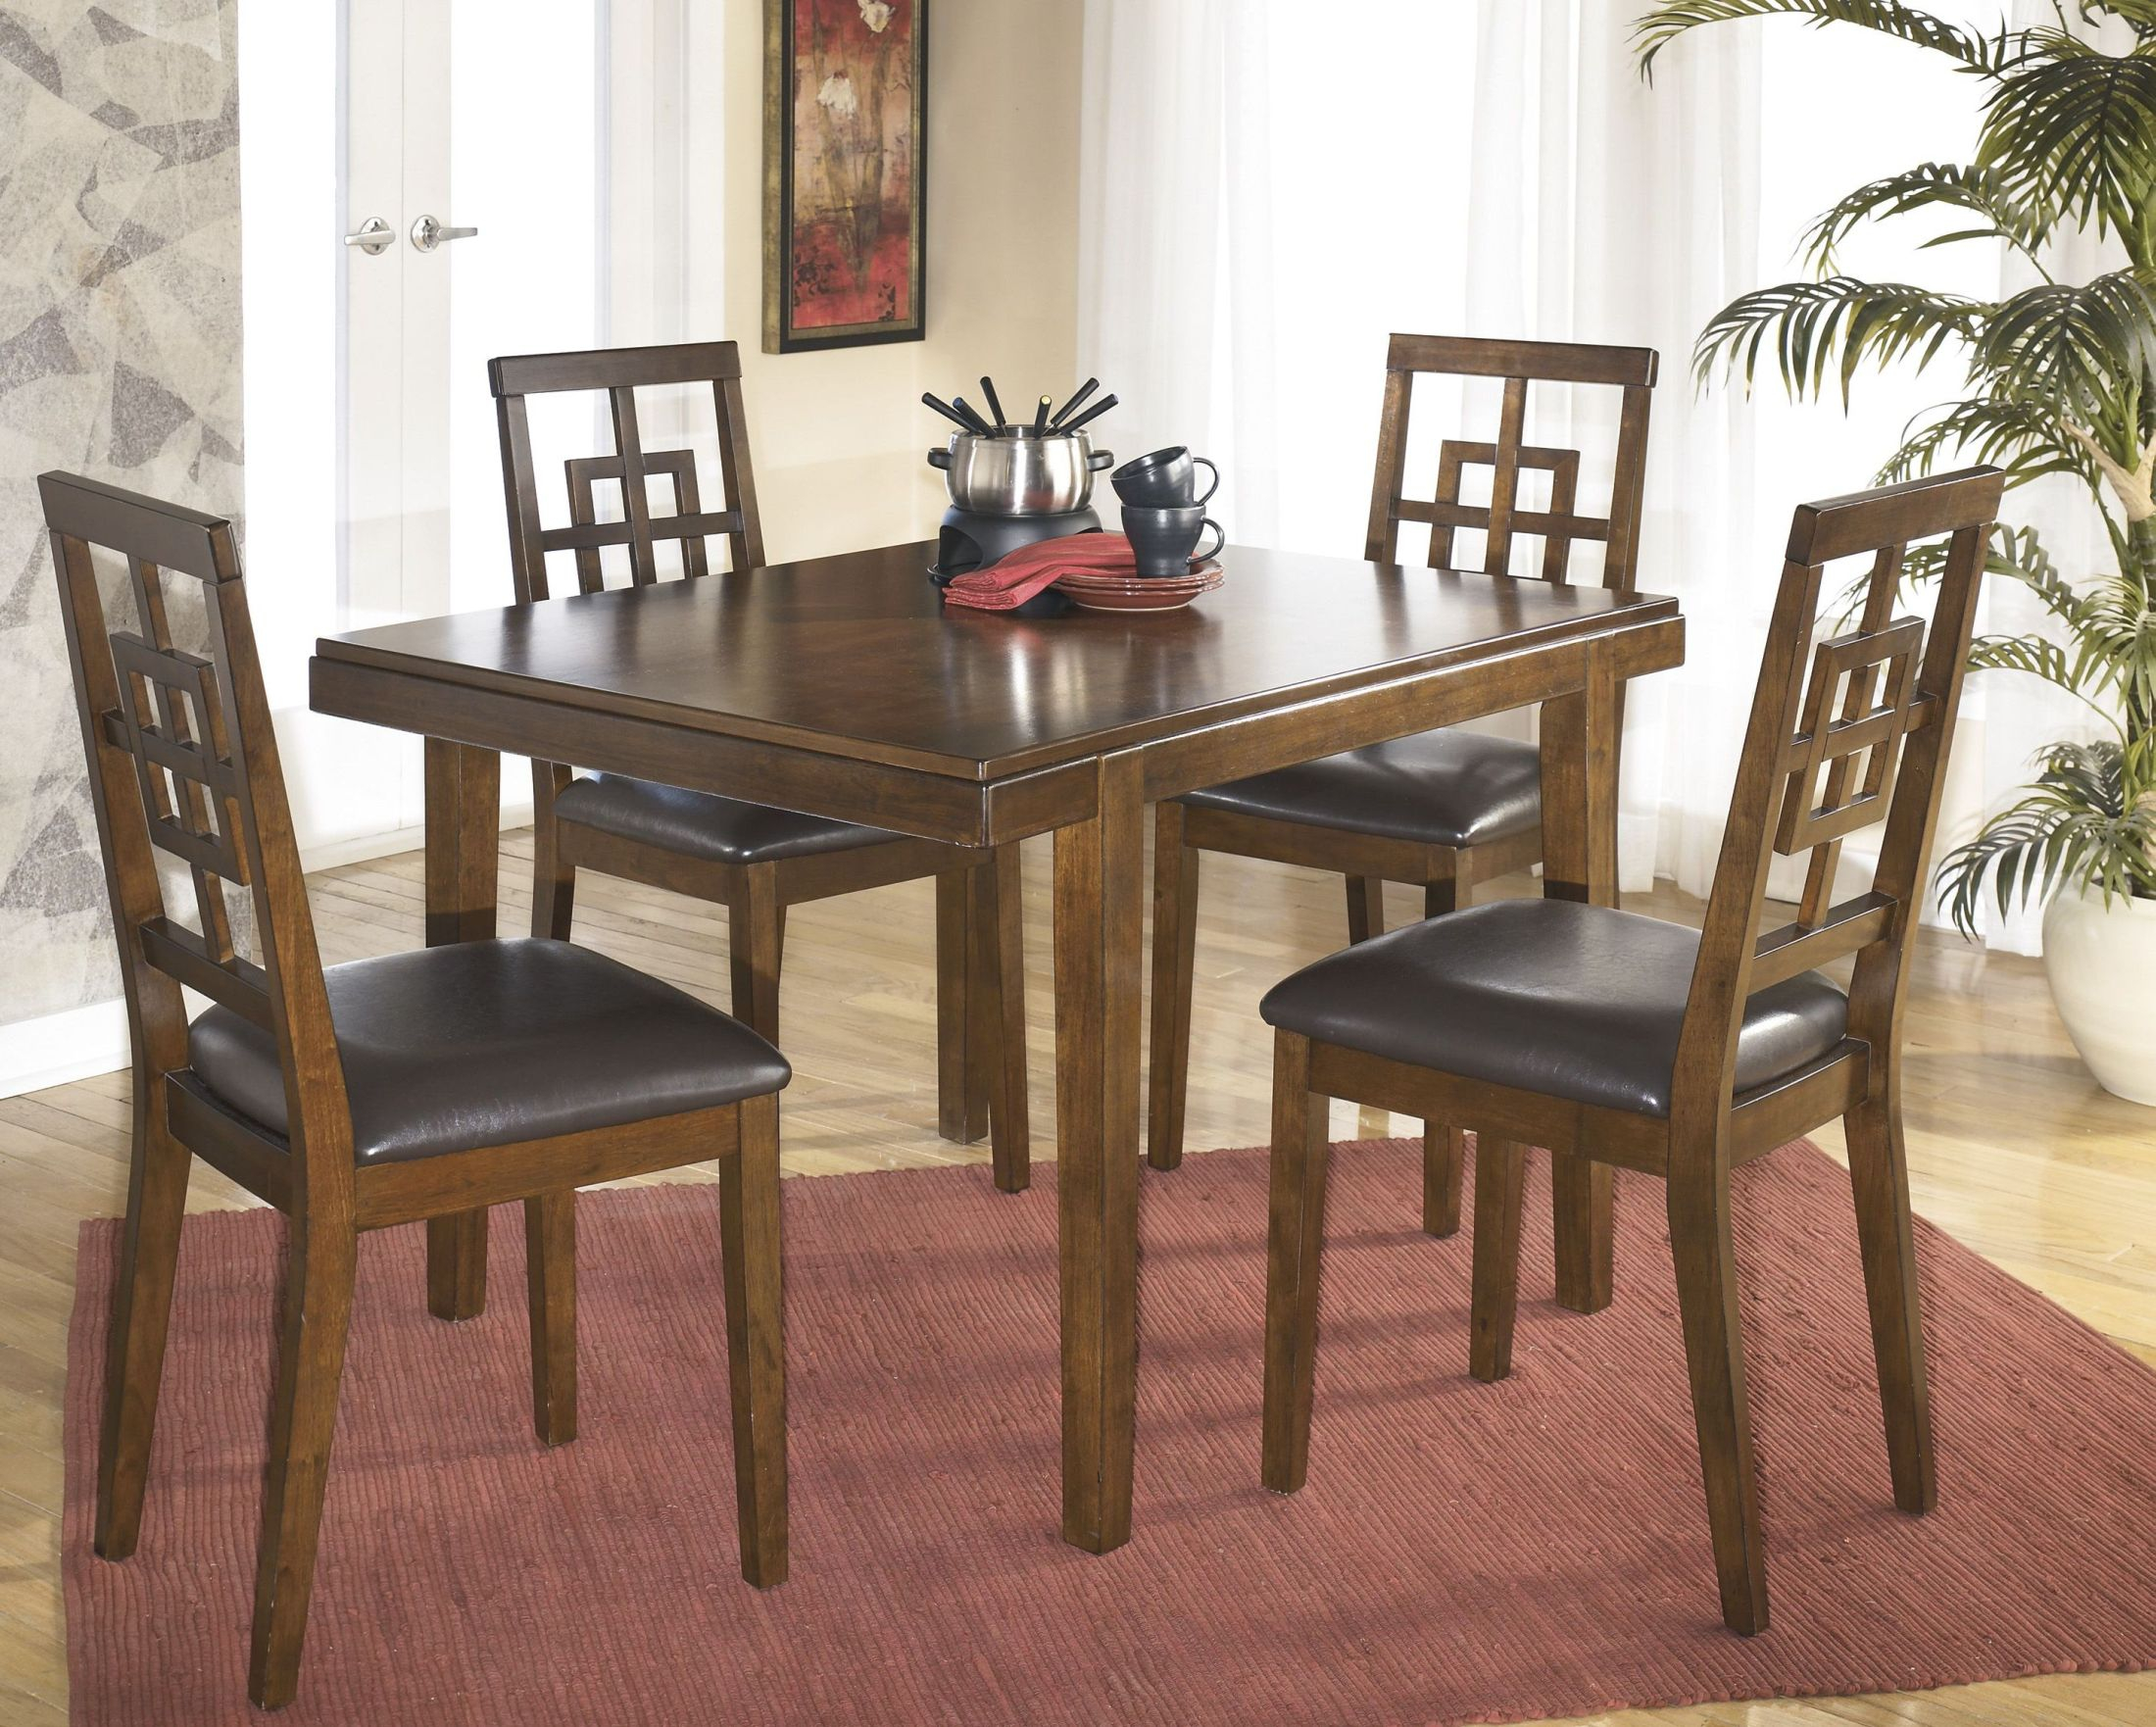 Maysville Dining Room Table With 4 Chairs • Faucet Ideas Site